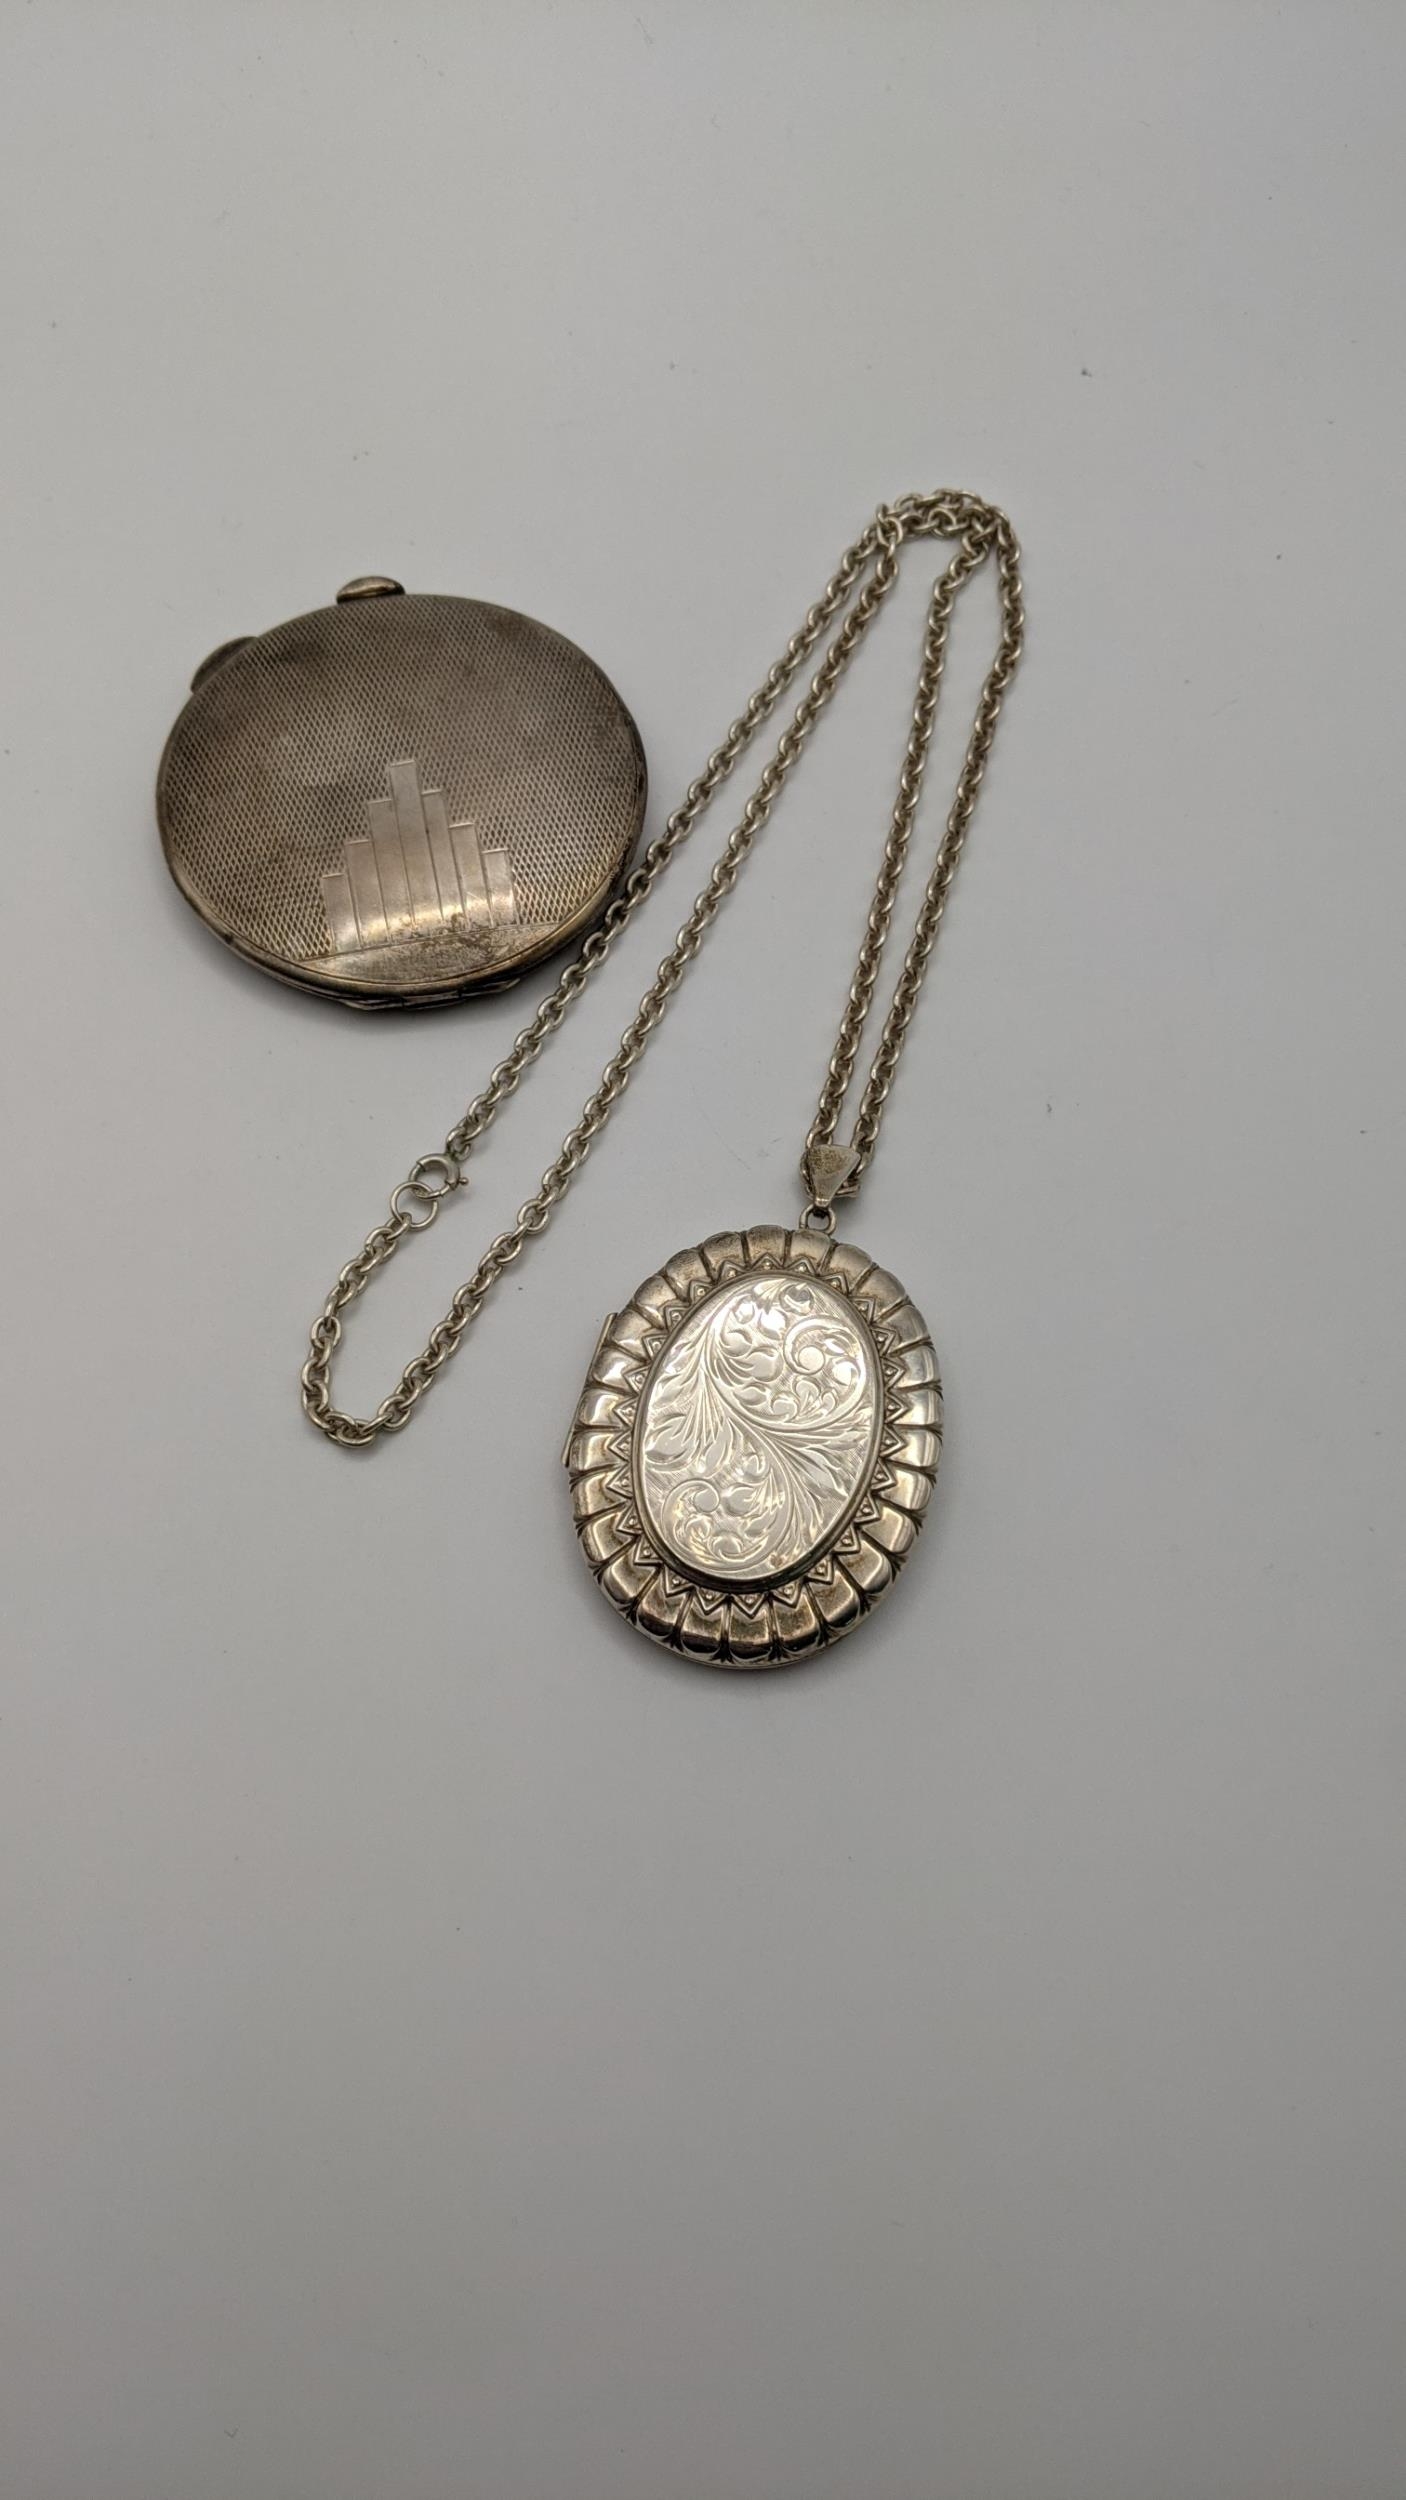 A silver locket having embossed and engraved detail on a silver necklace together with a silver